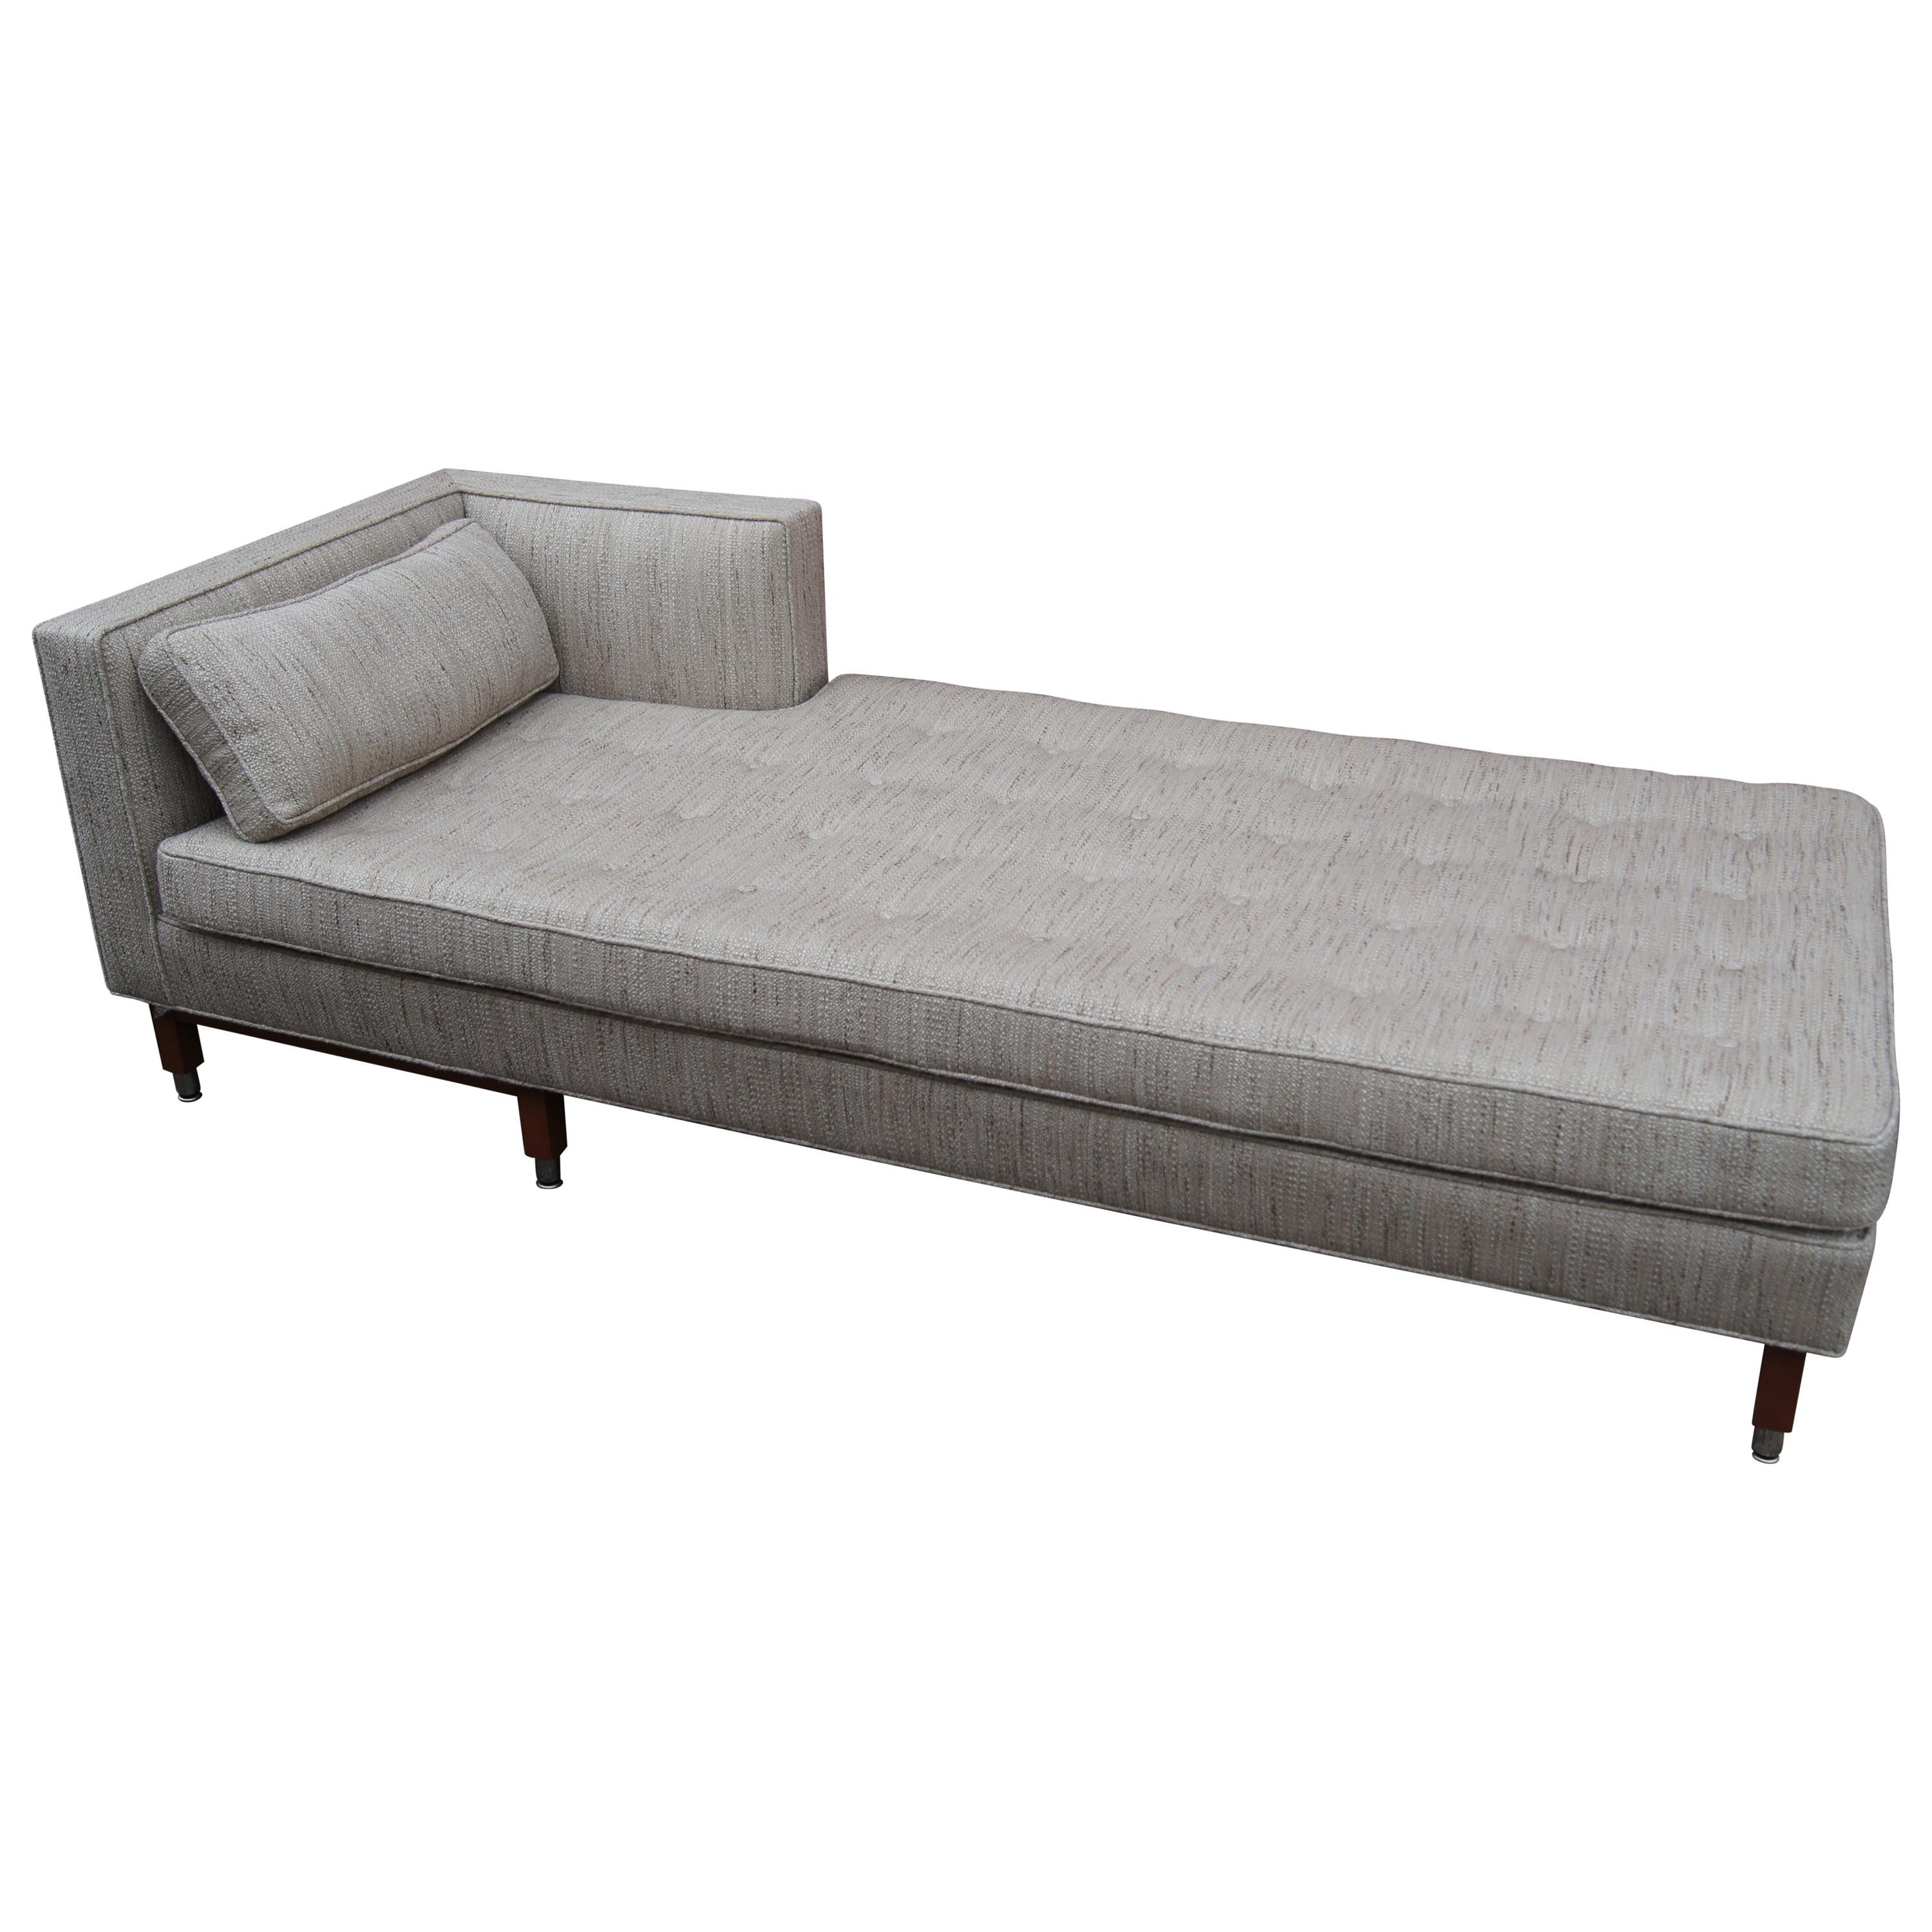 Daybed in the Style of Mid-Century Edward Wormley for Dunbar